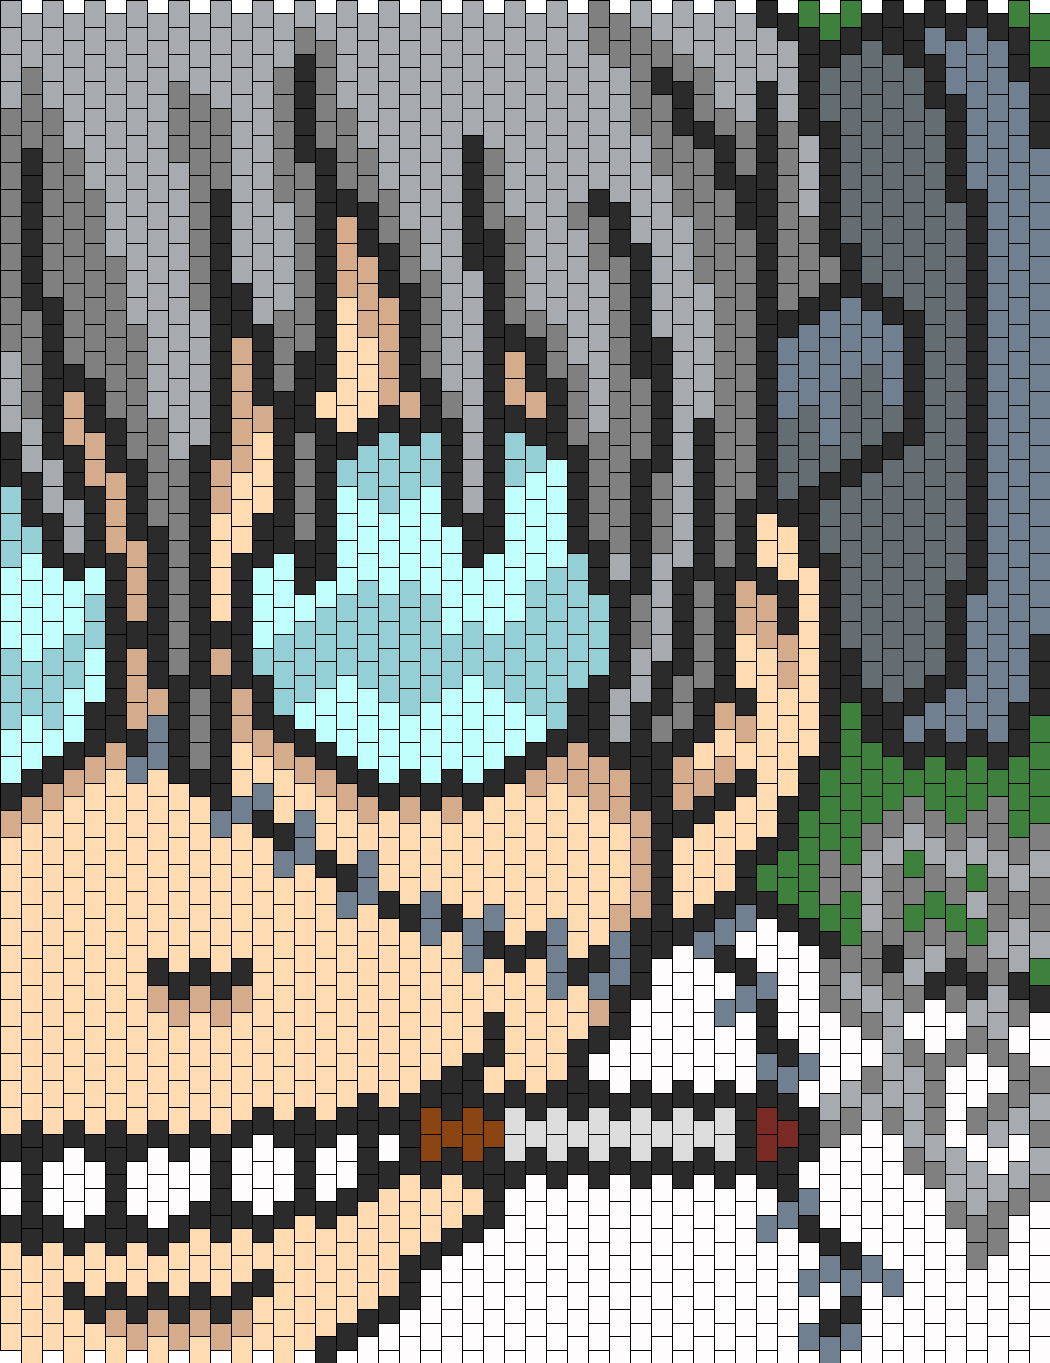 Stein From Soul Eater